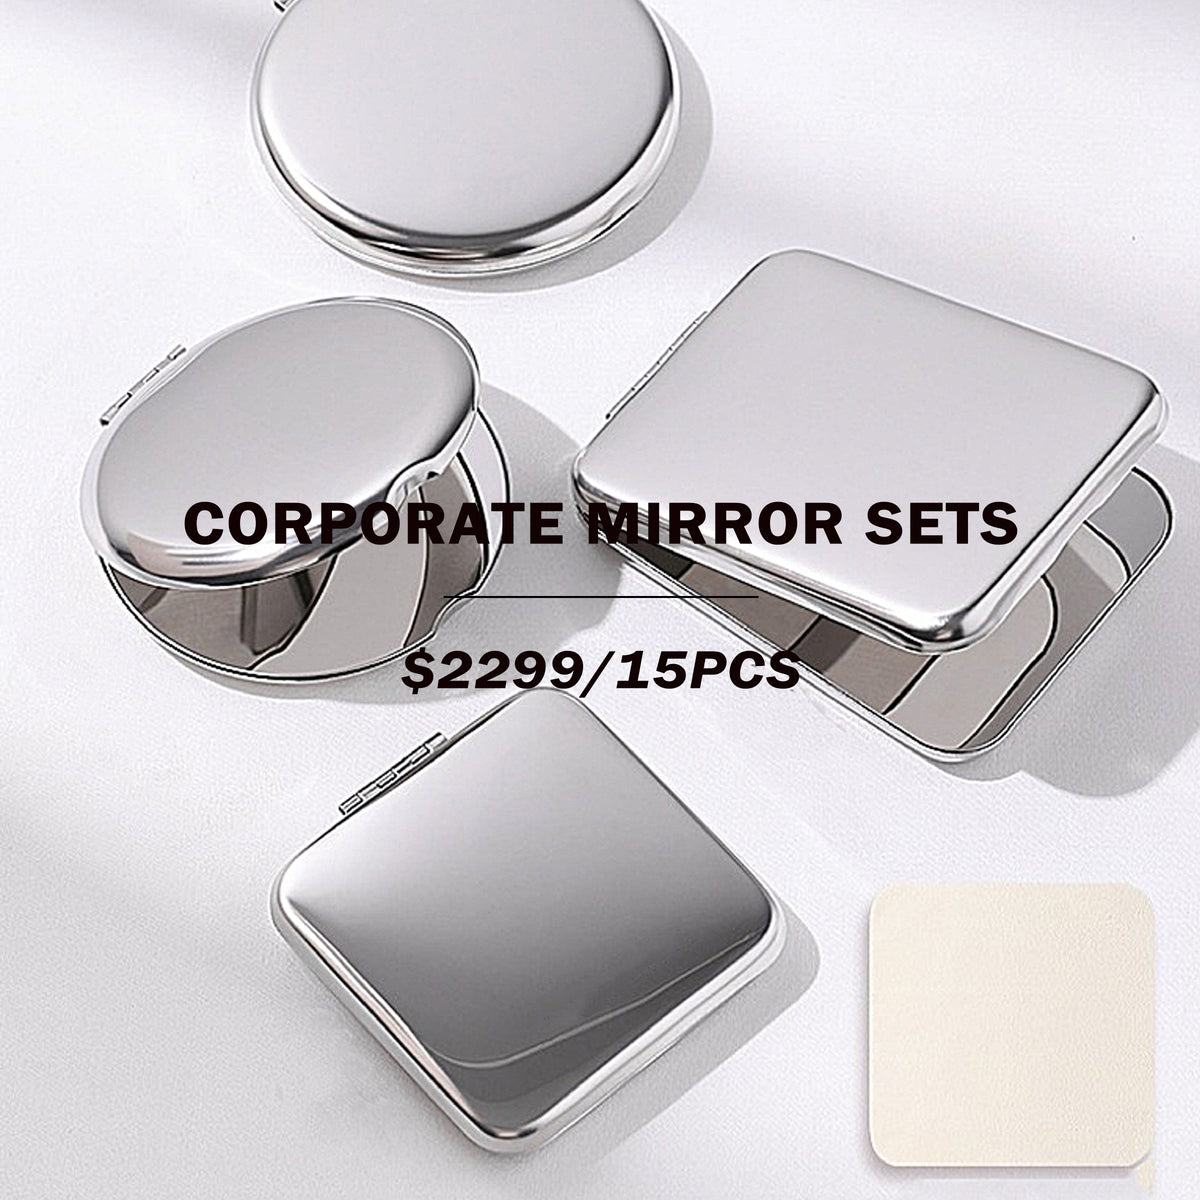 【Corporate Gifts】 Double-Sided Makeup Mirror & Portable Mirror Customization Double-Sided Makeup Mirror & Portable Mirror Printing Logo X 15pcs |隨身鏡子15件套訂製 補妝鏡訂製